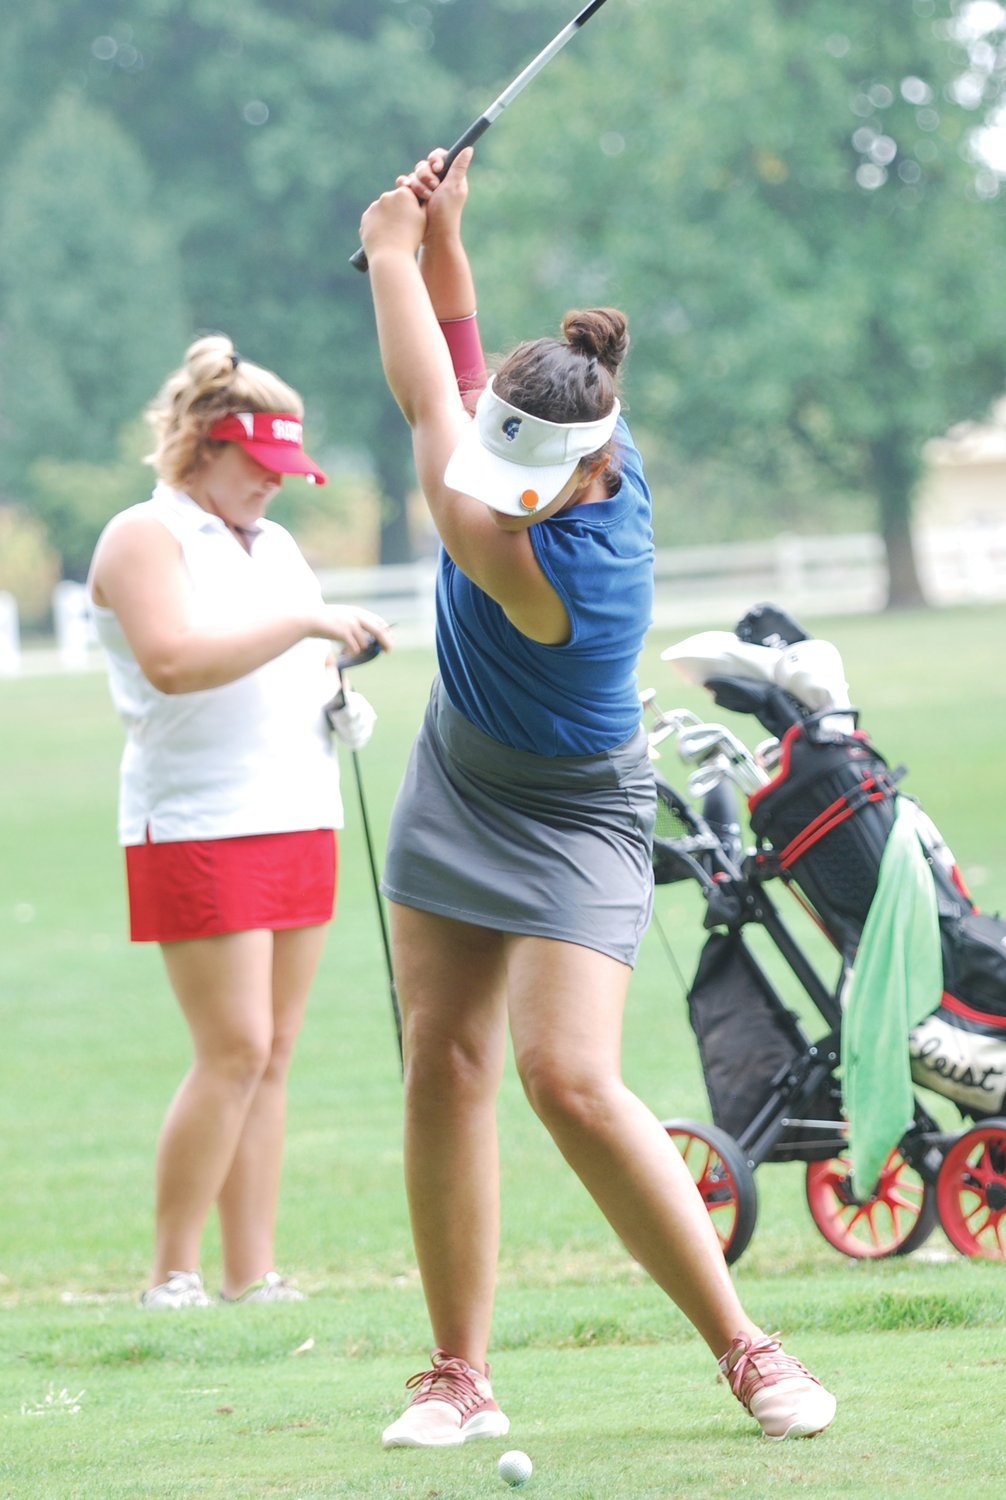 Crawfordsville's Bailey Mittal earned first-team all-conference honors with a round of 89 on Saturday the Crawfordsville Country Club.